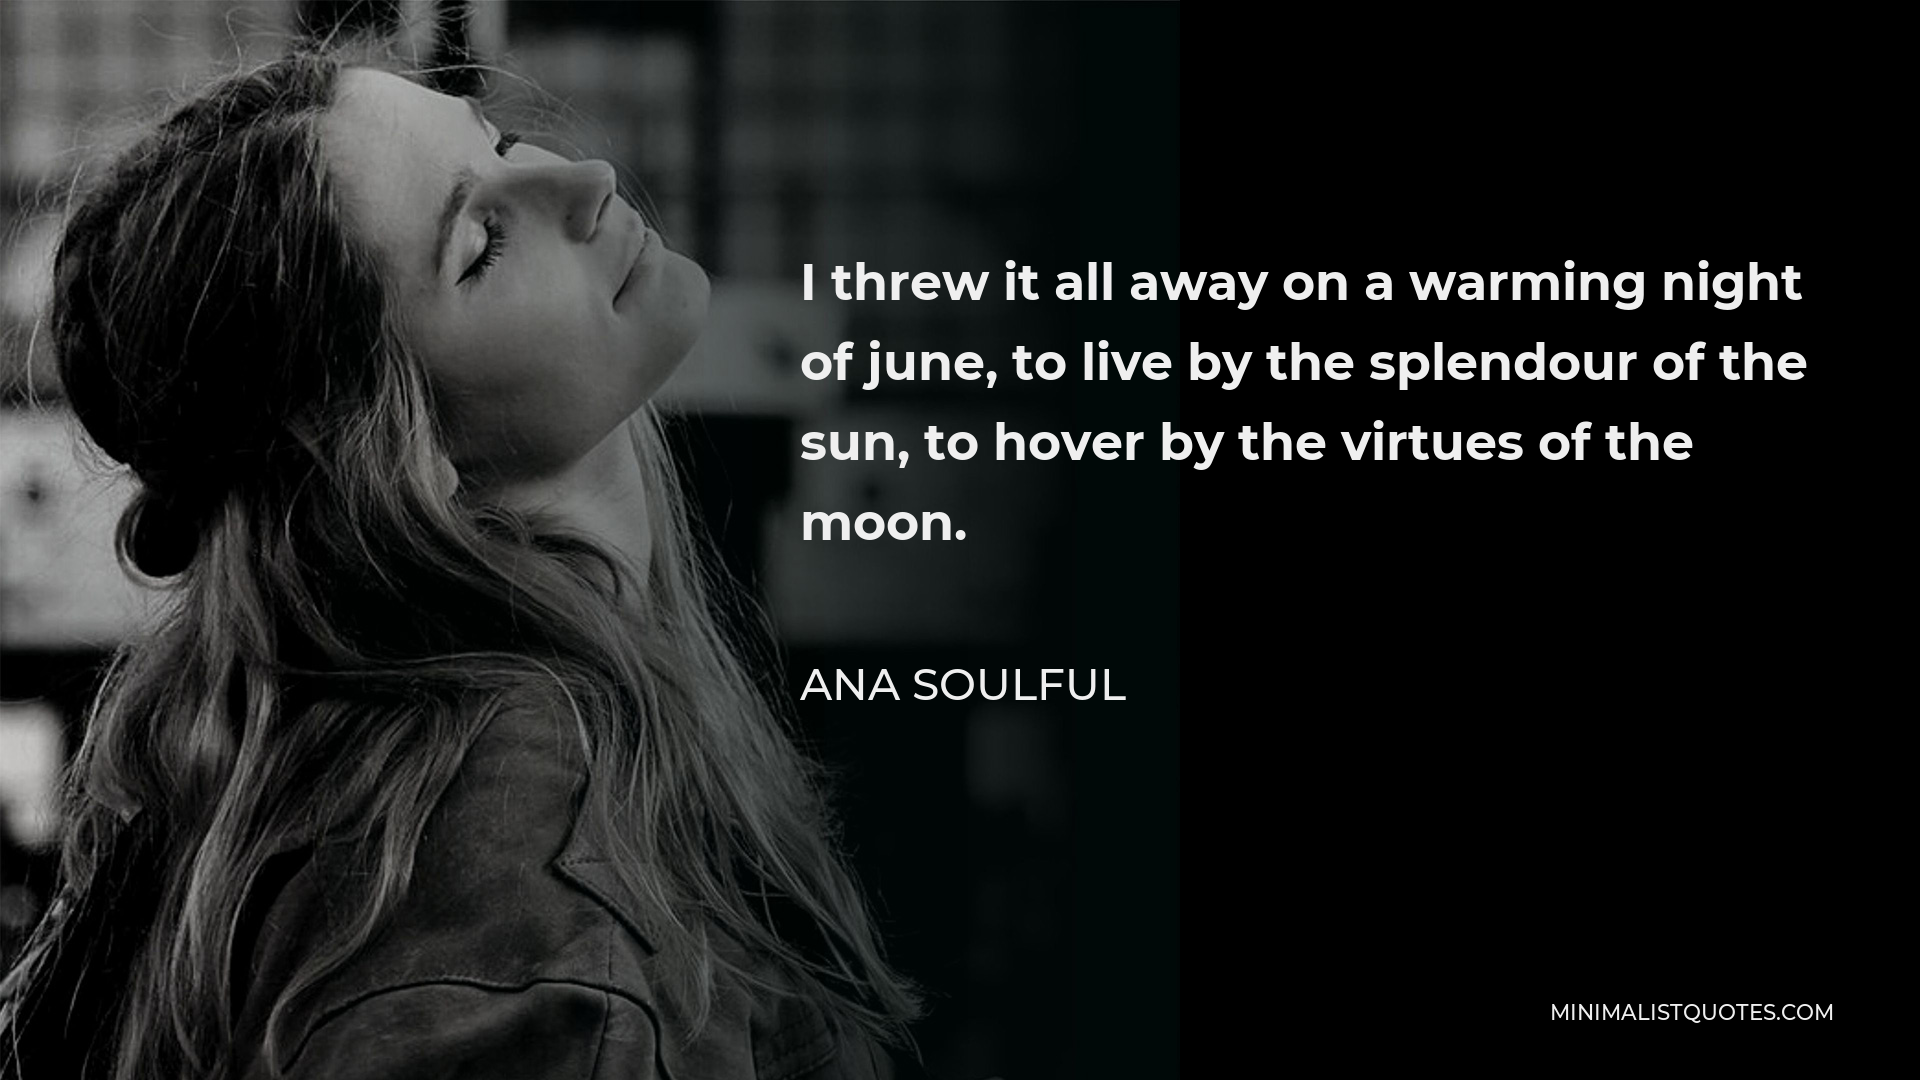 Ana Soulful Quote - I threw it all away on a warming night of june, to live by the splendour of the sun, to hover by the virtues of the moon.